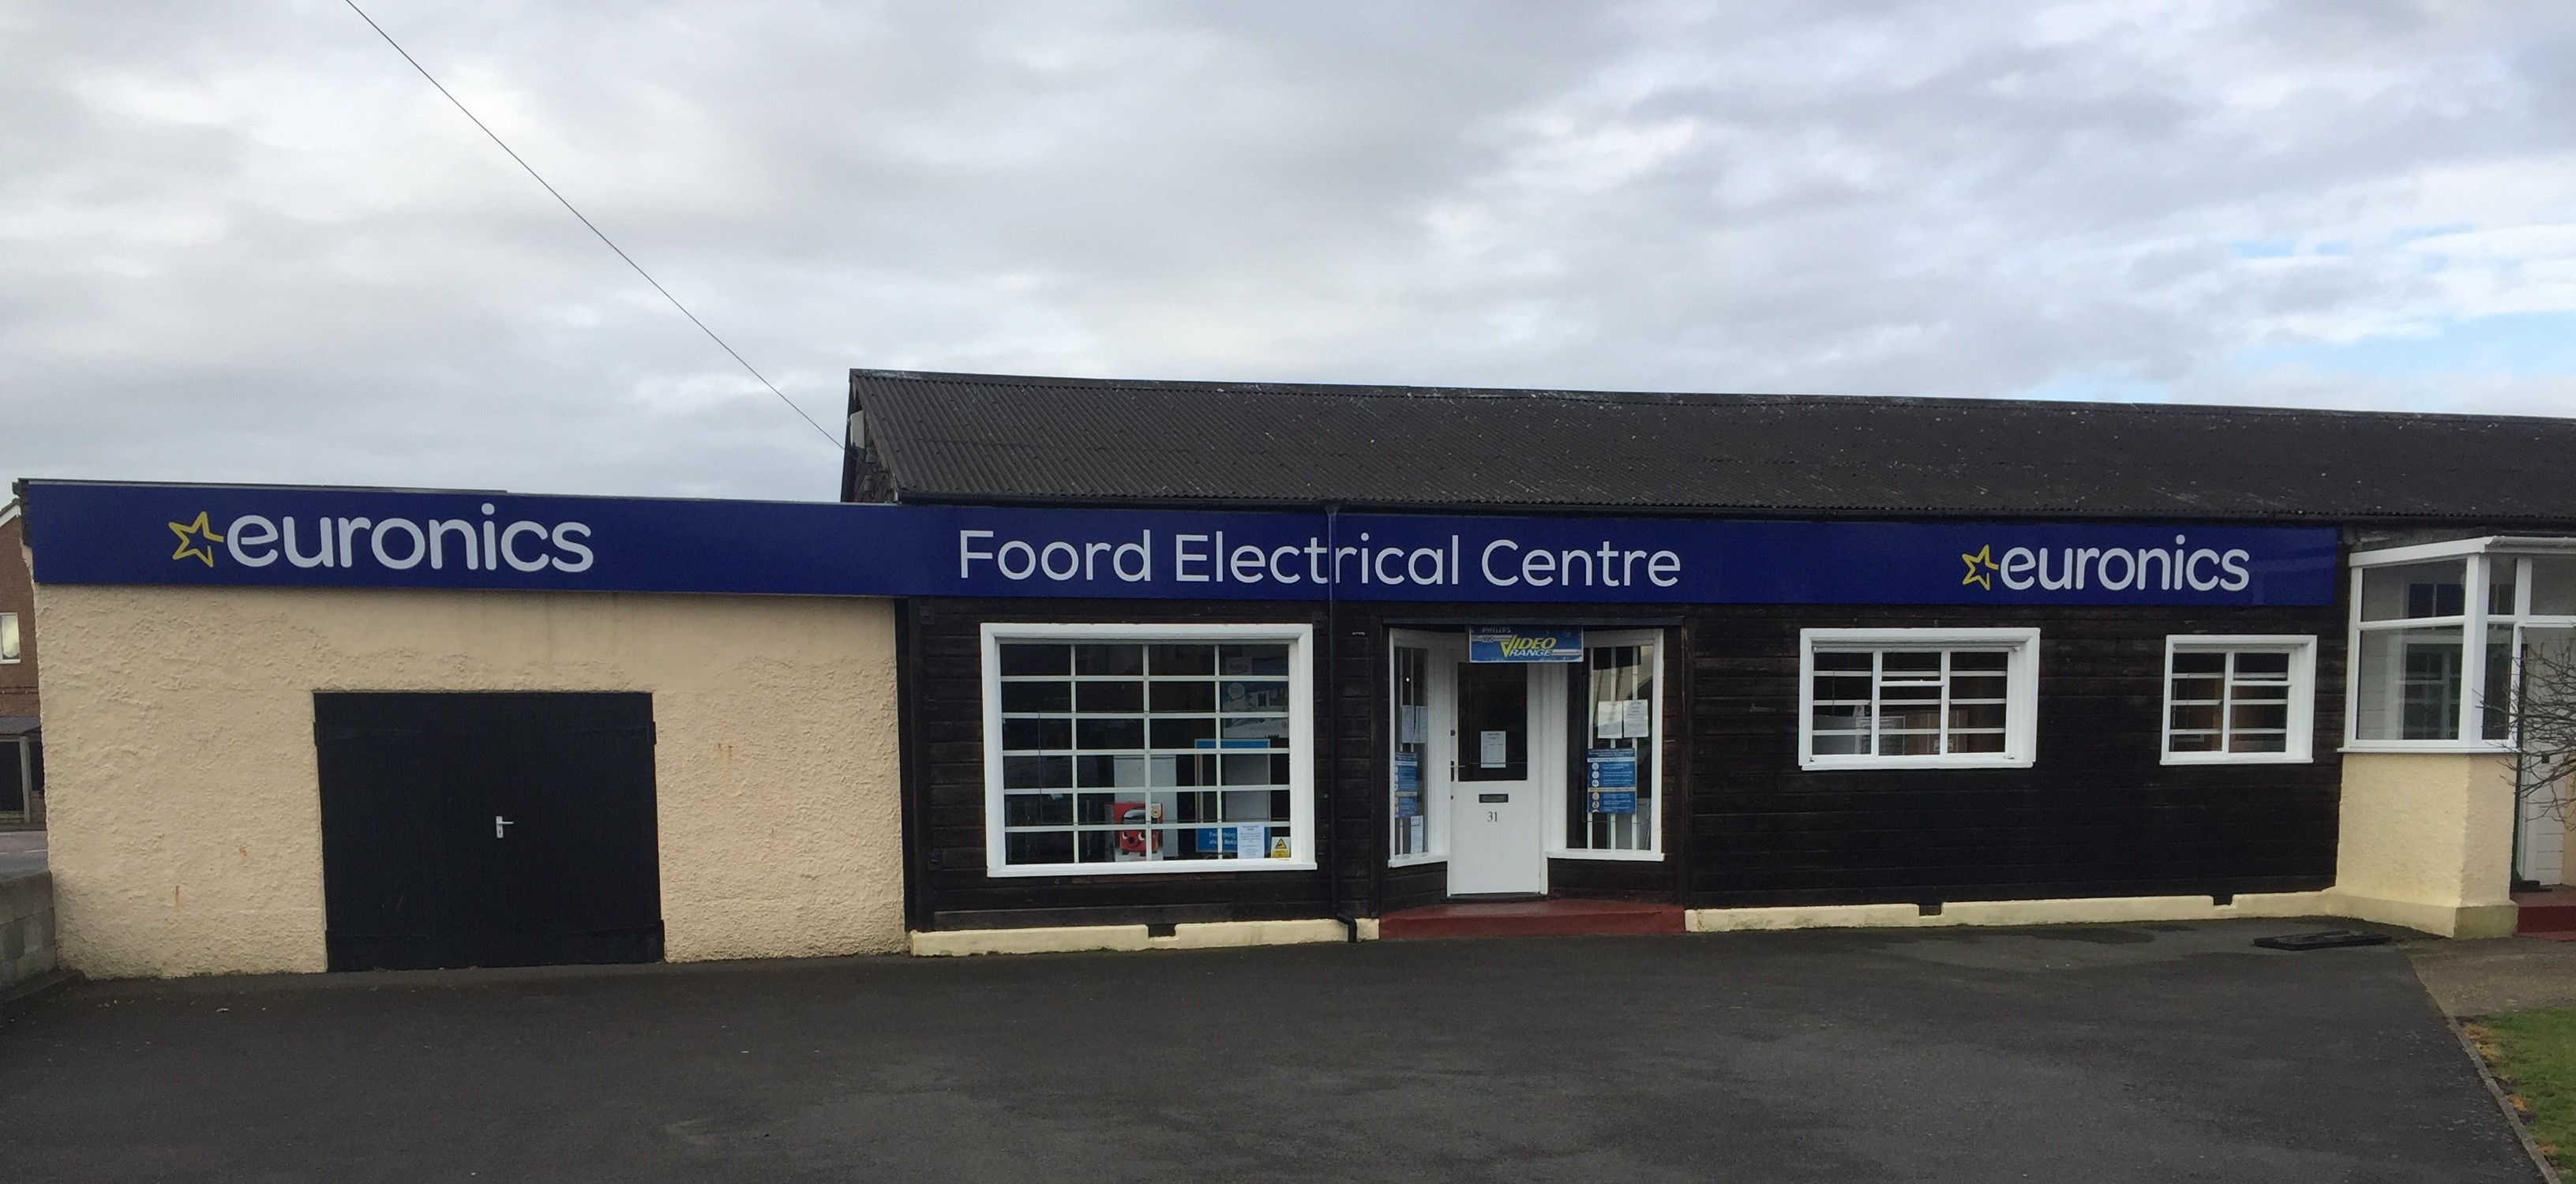 Foord Electrical Centre